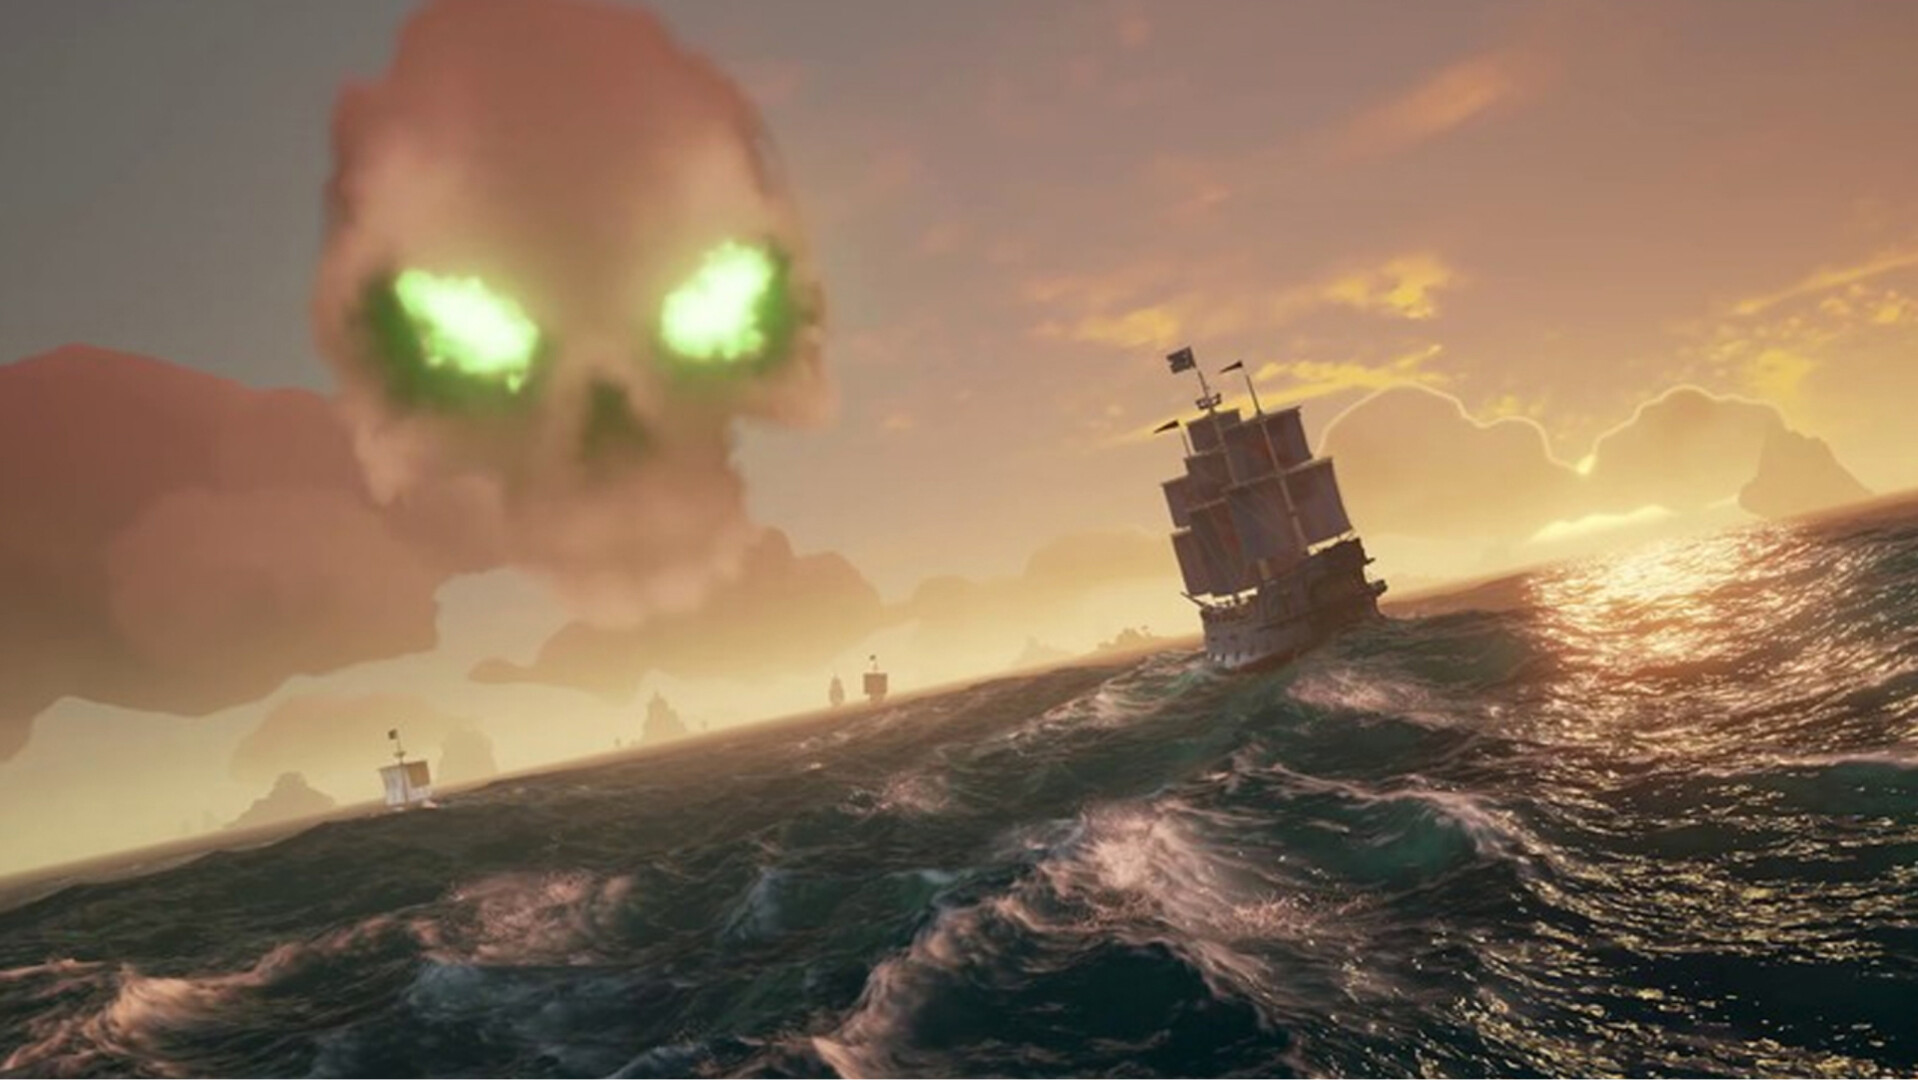 Sea Of Thieves: 2023 Edition Steam Account